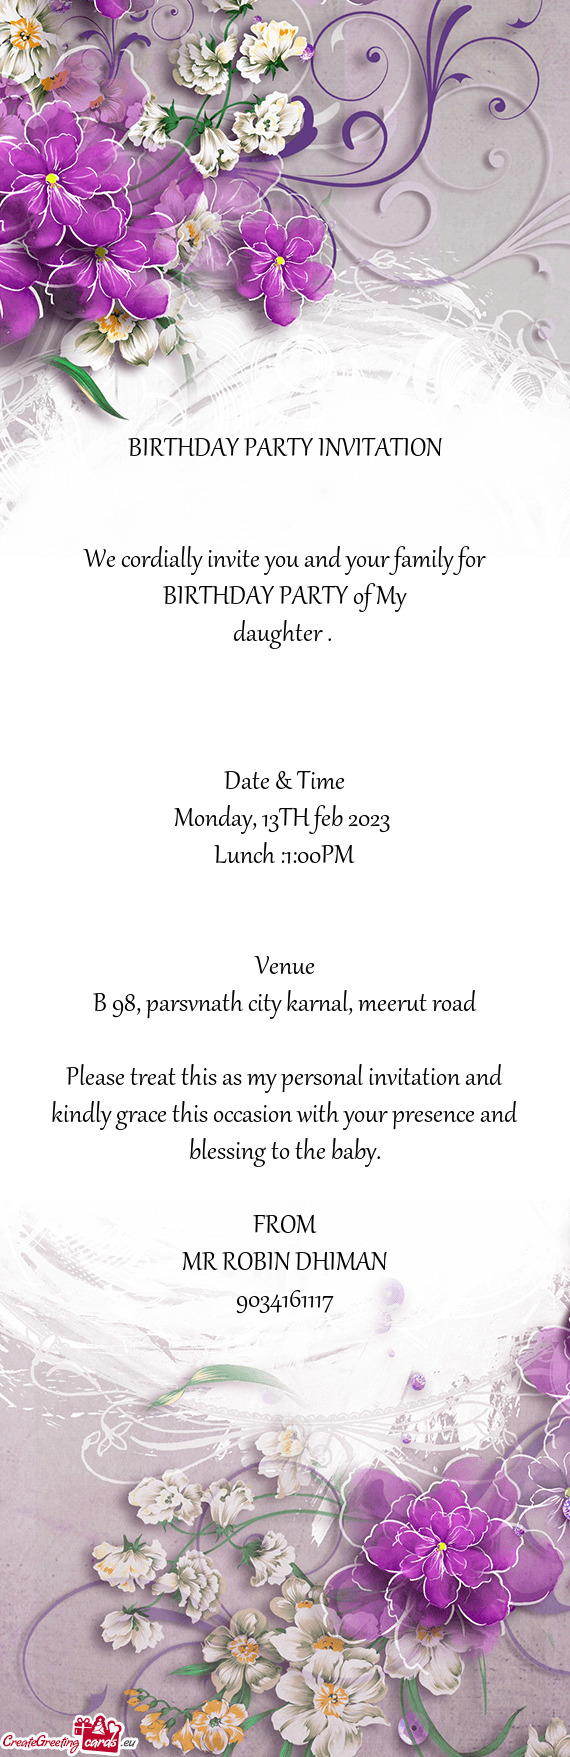 We cordially invite you and your family for BIRTHDAY PARTY of My